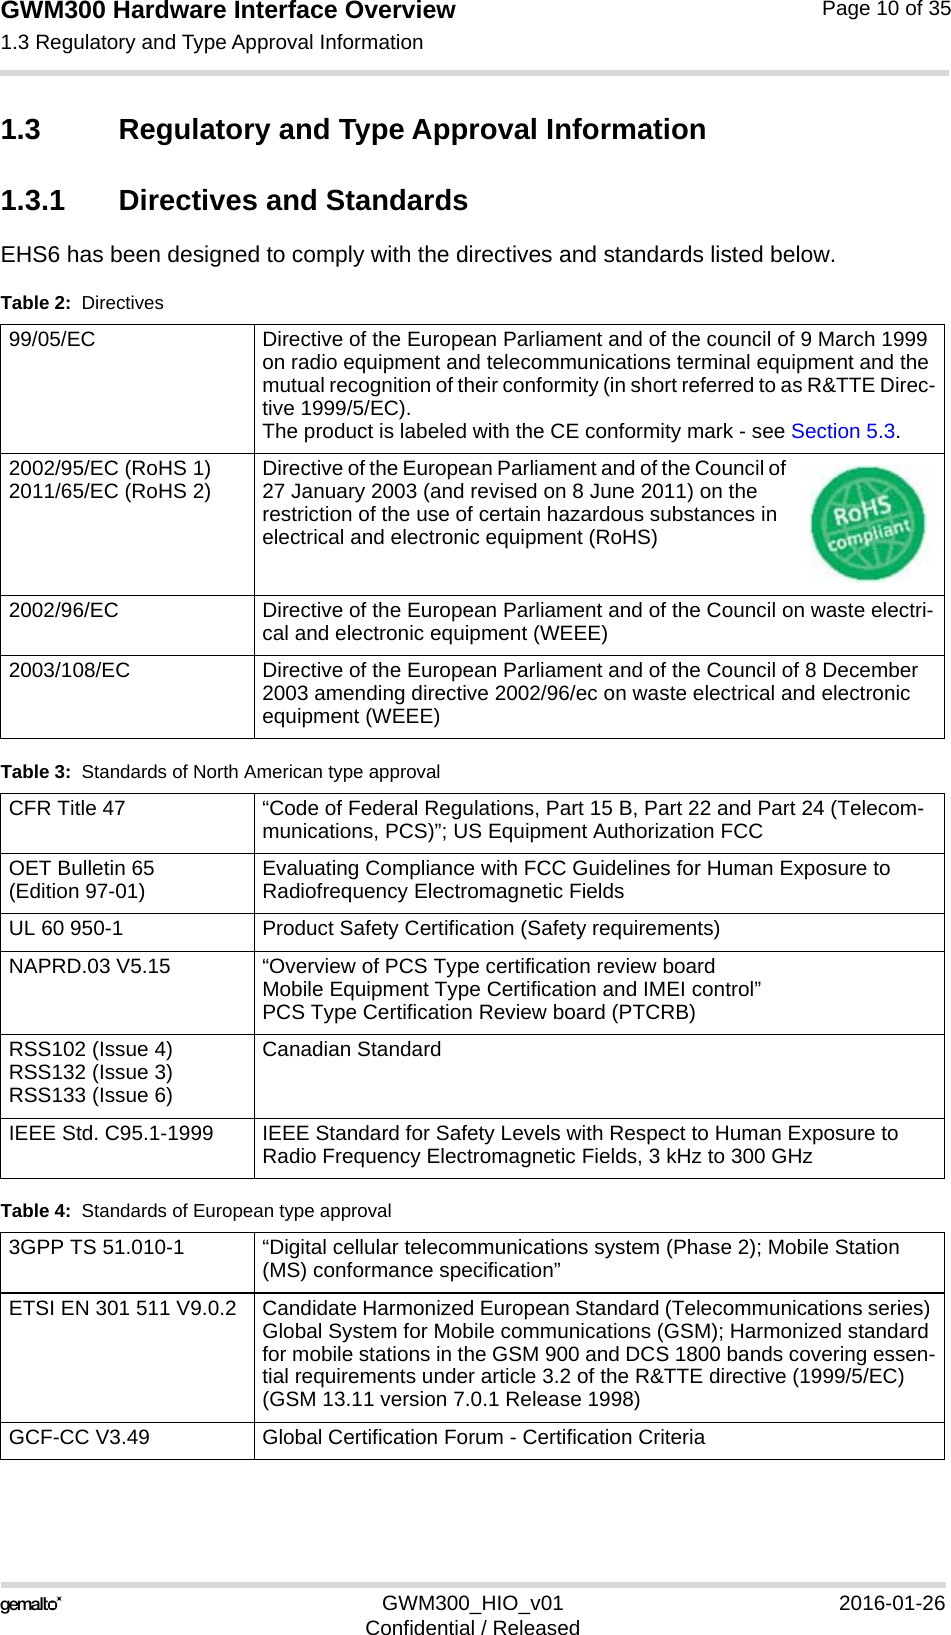 GWM300 Hardware Interface Overview1.3 Regulatory and Type Approval Information15GWM300_HIO_v01 2016-01-26Confidential / ReleasedPage 10 of 351.3 Regulatory and Type Approval Information1.3.1 Directives and StandardsEHS6 has been designed to comply with the directives and standards listed below. Table 2:  Directives99/05/EC Directive of the European Parliament and of the council of 9 March 1999 on radio equipment and telecommunications terminal equipment and the mutual recognition of their conformity (in short referred to as R&amp;TTE Direc-tive 1999/5/EC).The product is labeled with the CE conformity mark - see Section 5.3.2002/95/EC (RoHS 1)2011/65/EC (RoHS 2) Directive of the European Parliament and of the Council of 27 January 2003 (and revised on 8 June 2011) on the restriction of the use of certain hazardous substances in electrical and electronic equipment (RoHS)2002/96/EC Directive of the European Parliament and of the Council on waste electri-cal and electronic equipment (WEEE)2003/108/EC Directive of the European Parliament and of the Council of 8 December 2003 amending directive 2002/96/ec on waste electrical and electronic equipment (WEEE)Table 3:  Standards of North American type approvalCFR Title 47 “Code of Federal Regulations, Part 15 B, Part 22 and Part 24 (Telecom-munications, PCS)”; US Equipment Authorization FCCOET Bulletin 65(Edition 97-01) Evaluating Compliance with FCC Guidelines for Human Exposure to Radiofrequency Electromagnetic FieldsUL 60 950-1 Product Safety Certification (Safety requirements)NAPRD.03 V5.15 “Overview of PCS Type certification review board Mobile Equipment Type Certification and IMEI control”PCS Type Certification Review board (PTCRB)RSS102 (Issue 4)RSS132 (Issue 3)RSS133 (Issue 6)Canadian StandardIEEE Std. C95.1-1999 IEEE Standard for Safety Levels with Respect to Human Exposure to Radio Frequency Electromagnetic Fields, 3 kHz to 300 GHzTable 4:  Standards of European type approval3GPP TS 51.010-1 “Digital cellular telecommunications system (Phase 2); Mobile Station (MS) conformance specification” ETSI EN 301 511 V9.0.2 Candidate Harmonized European Standard (Telecommunications series) Global System for Mobile communications (GSM); Harmonized standard for mobile stations in the GSM 900 and DCS 1800 bands covering essen-tial requirements under article 3.2 of the R&amp;TTE directive (1999/5/EC) (GSM 13.11 version 7.0.1 Release 1998)GCF-CC V3.49 Global Certification Forum - Certification Criteria